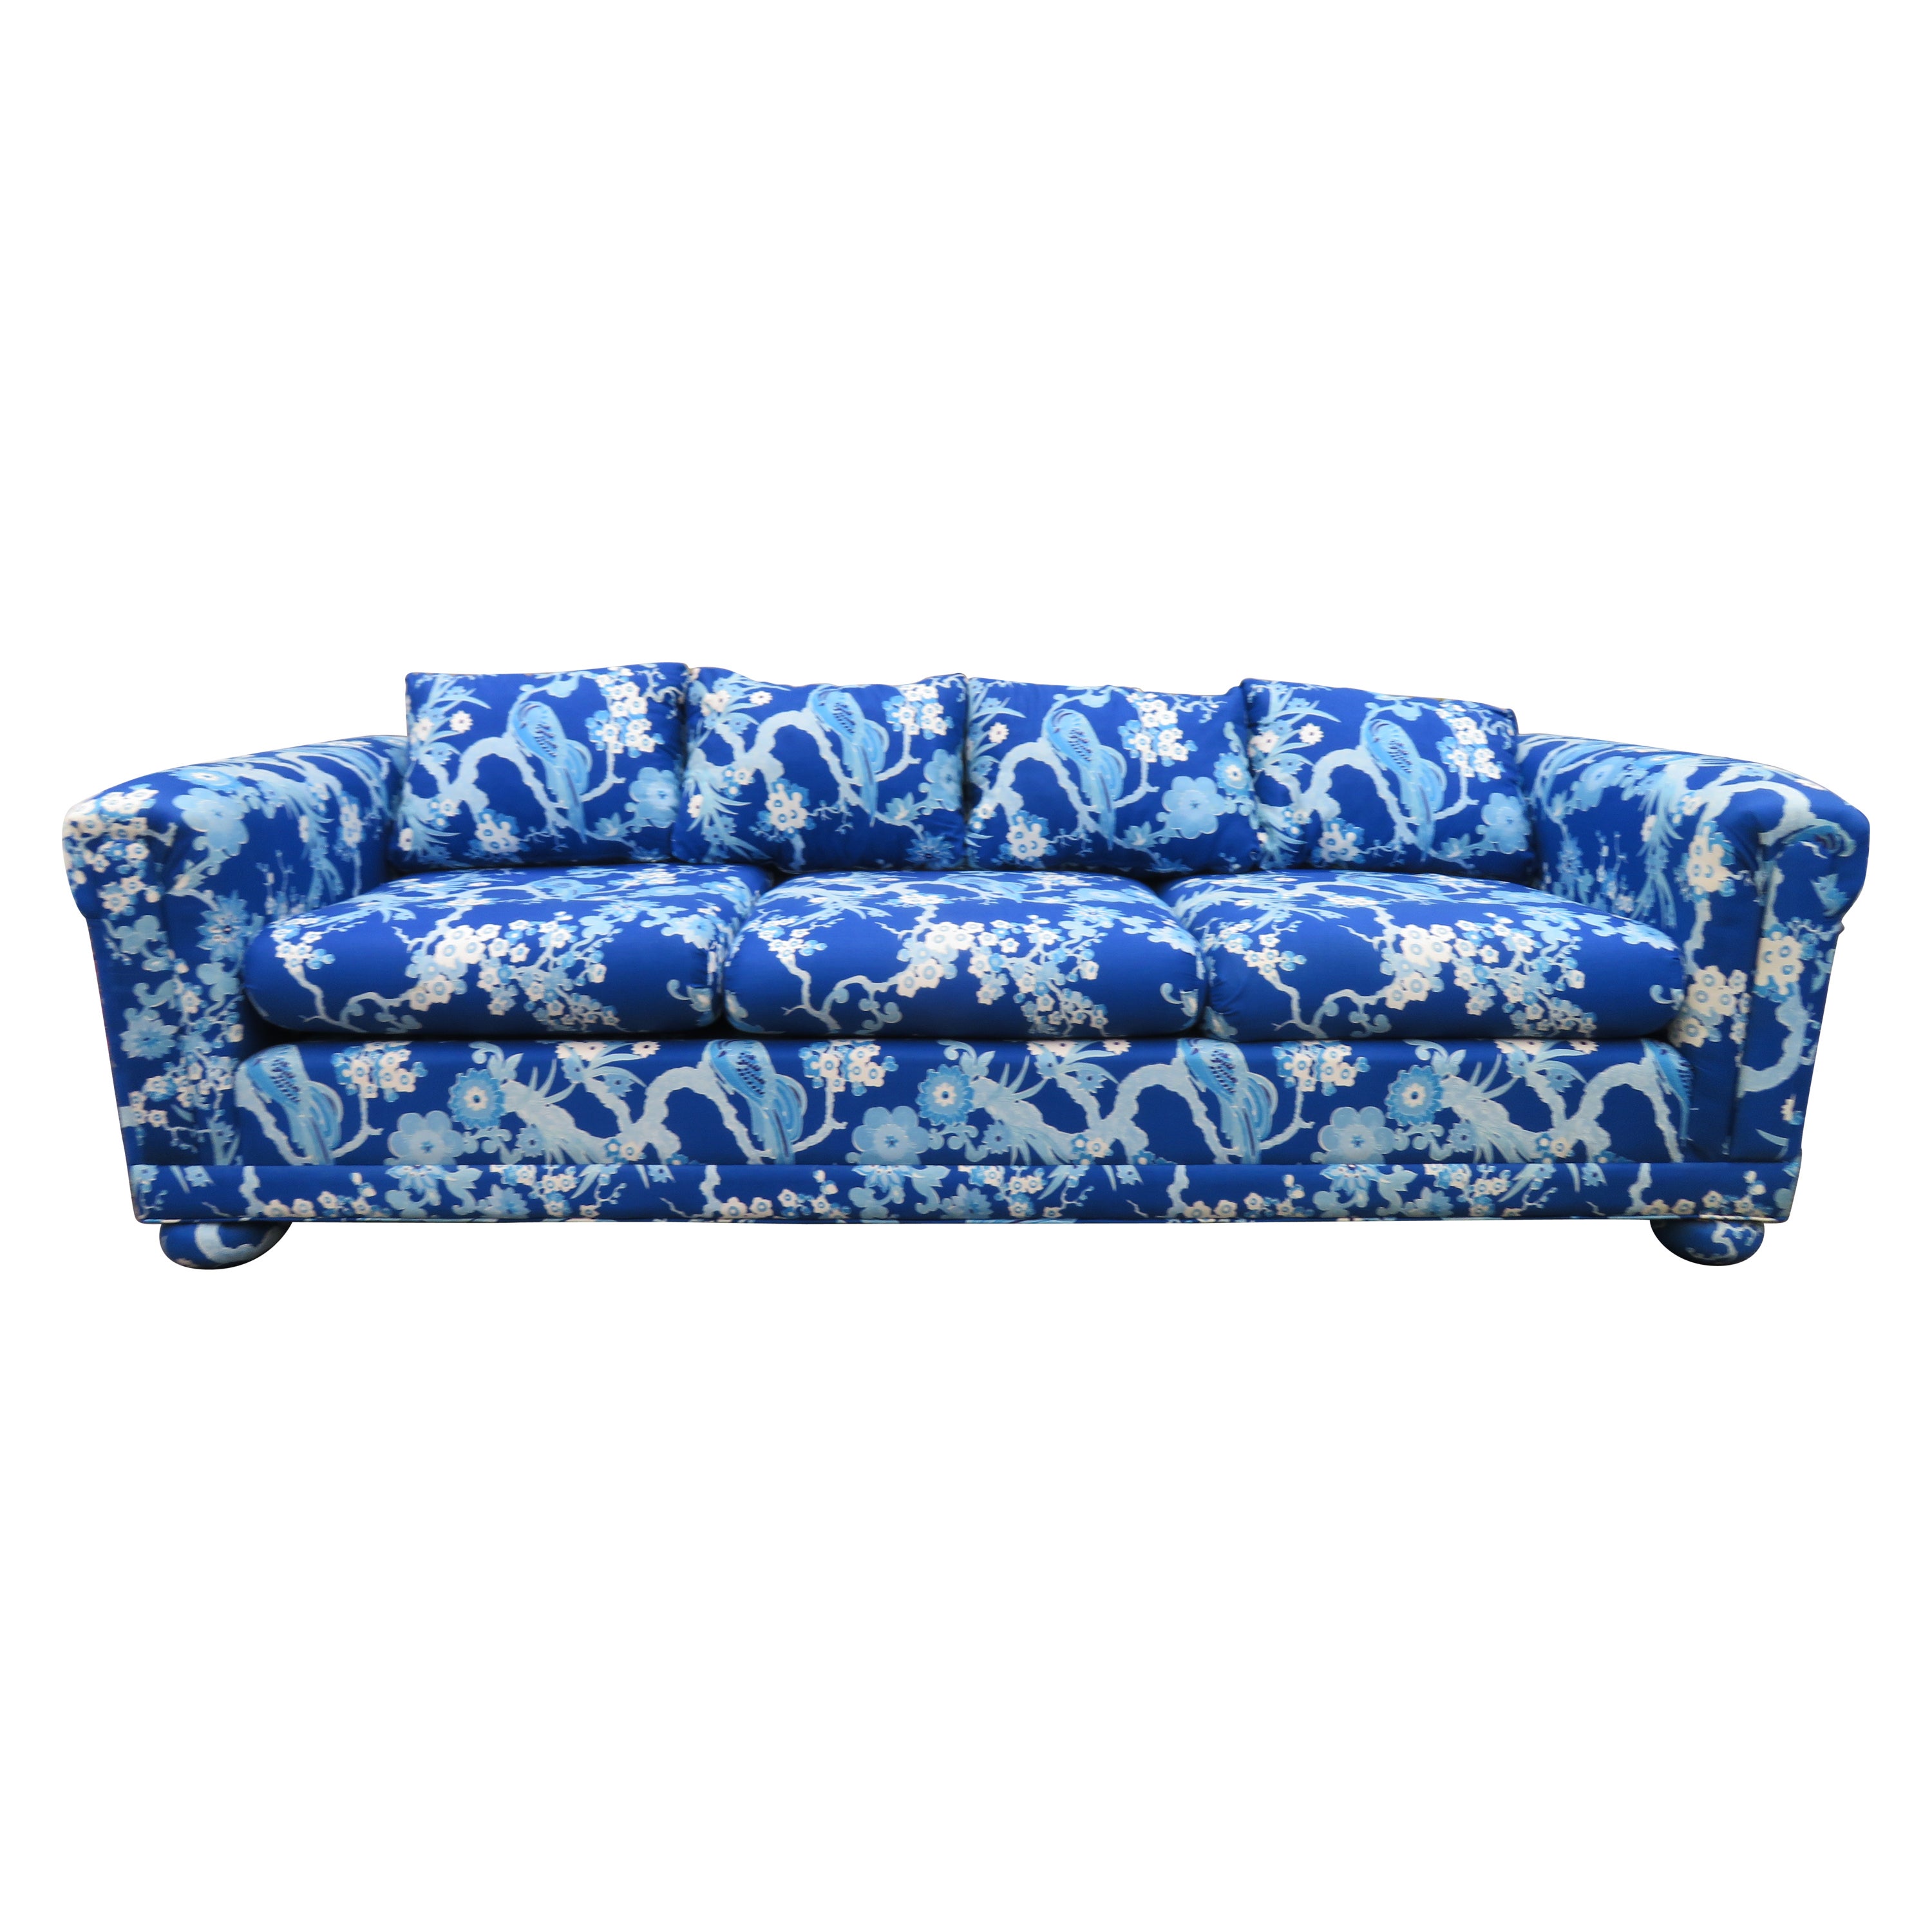 Stunning Asian Bird of Paradise Upholstered Sofa Chinoiserie Midcentury For Sale